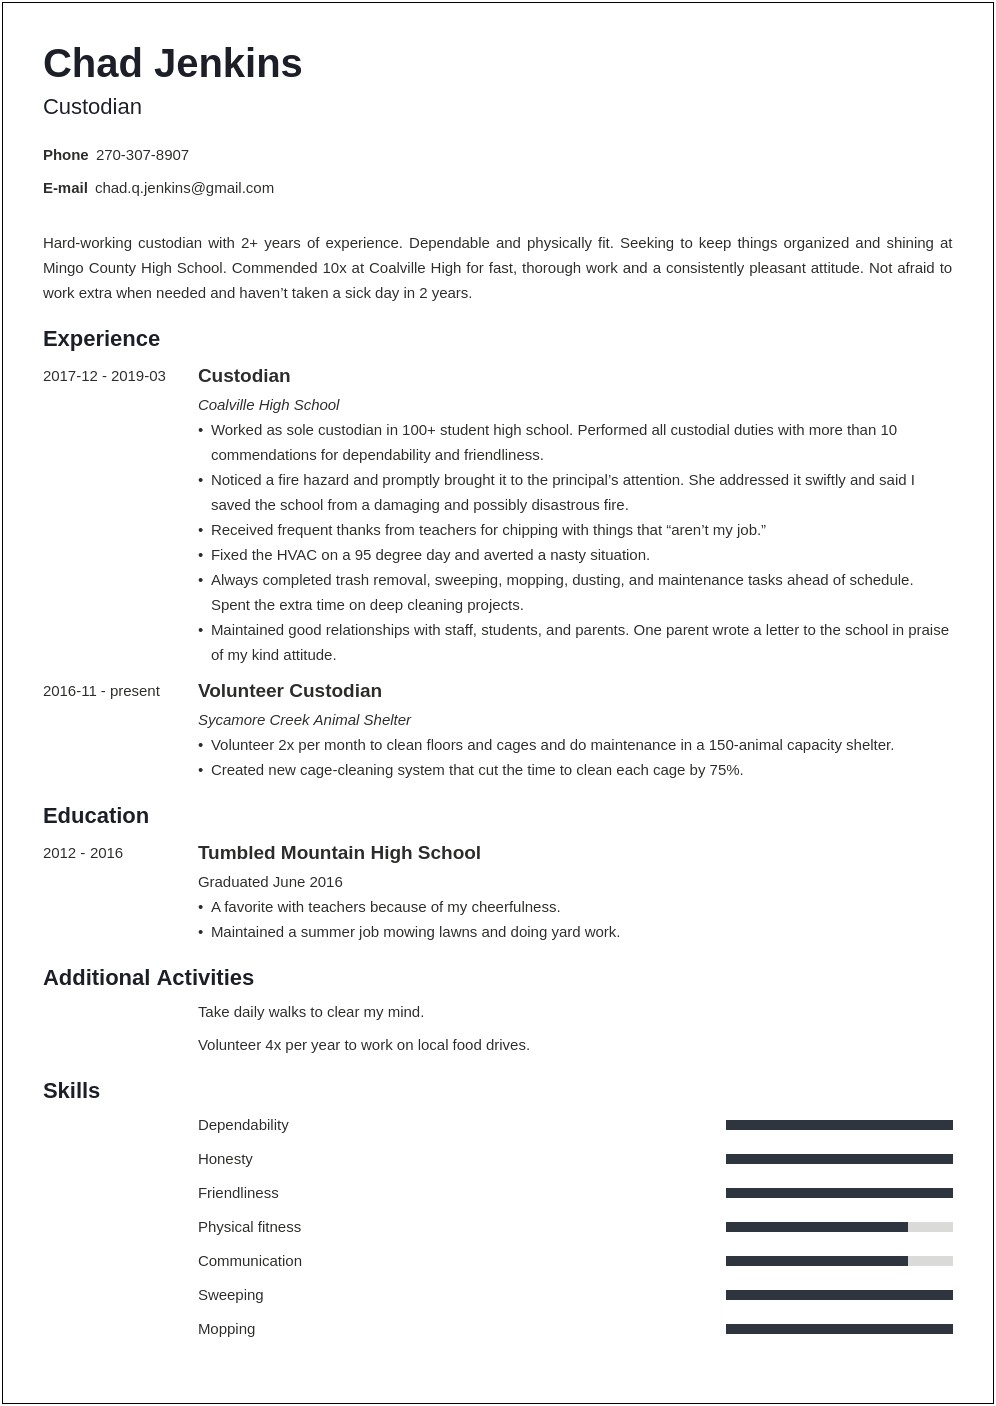 Resume Objectives For Custodial Position